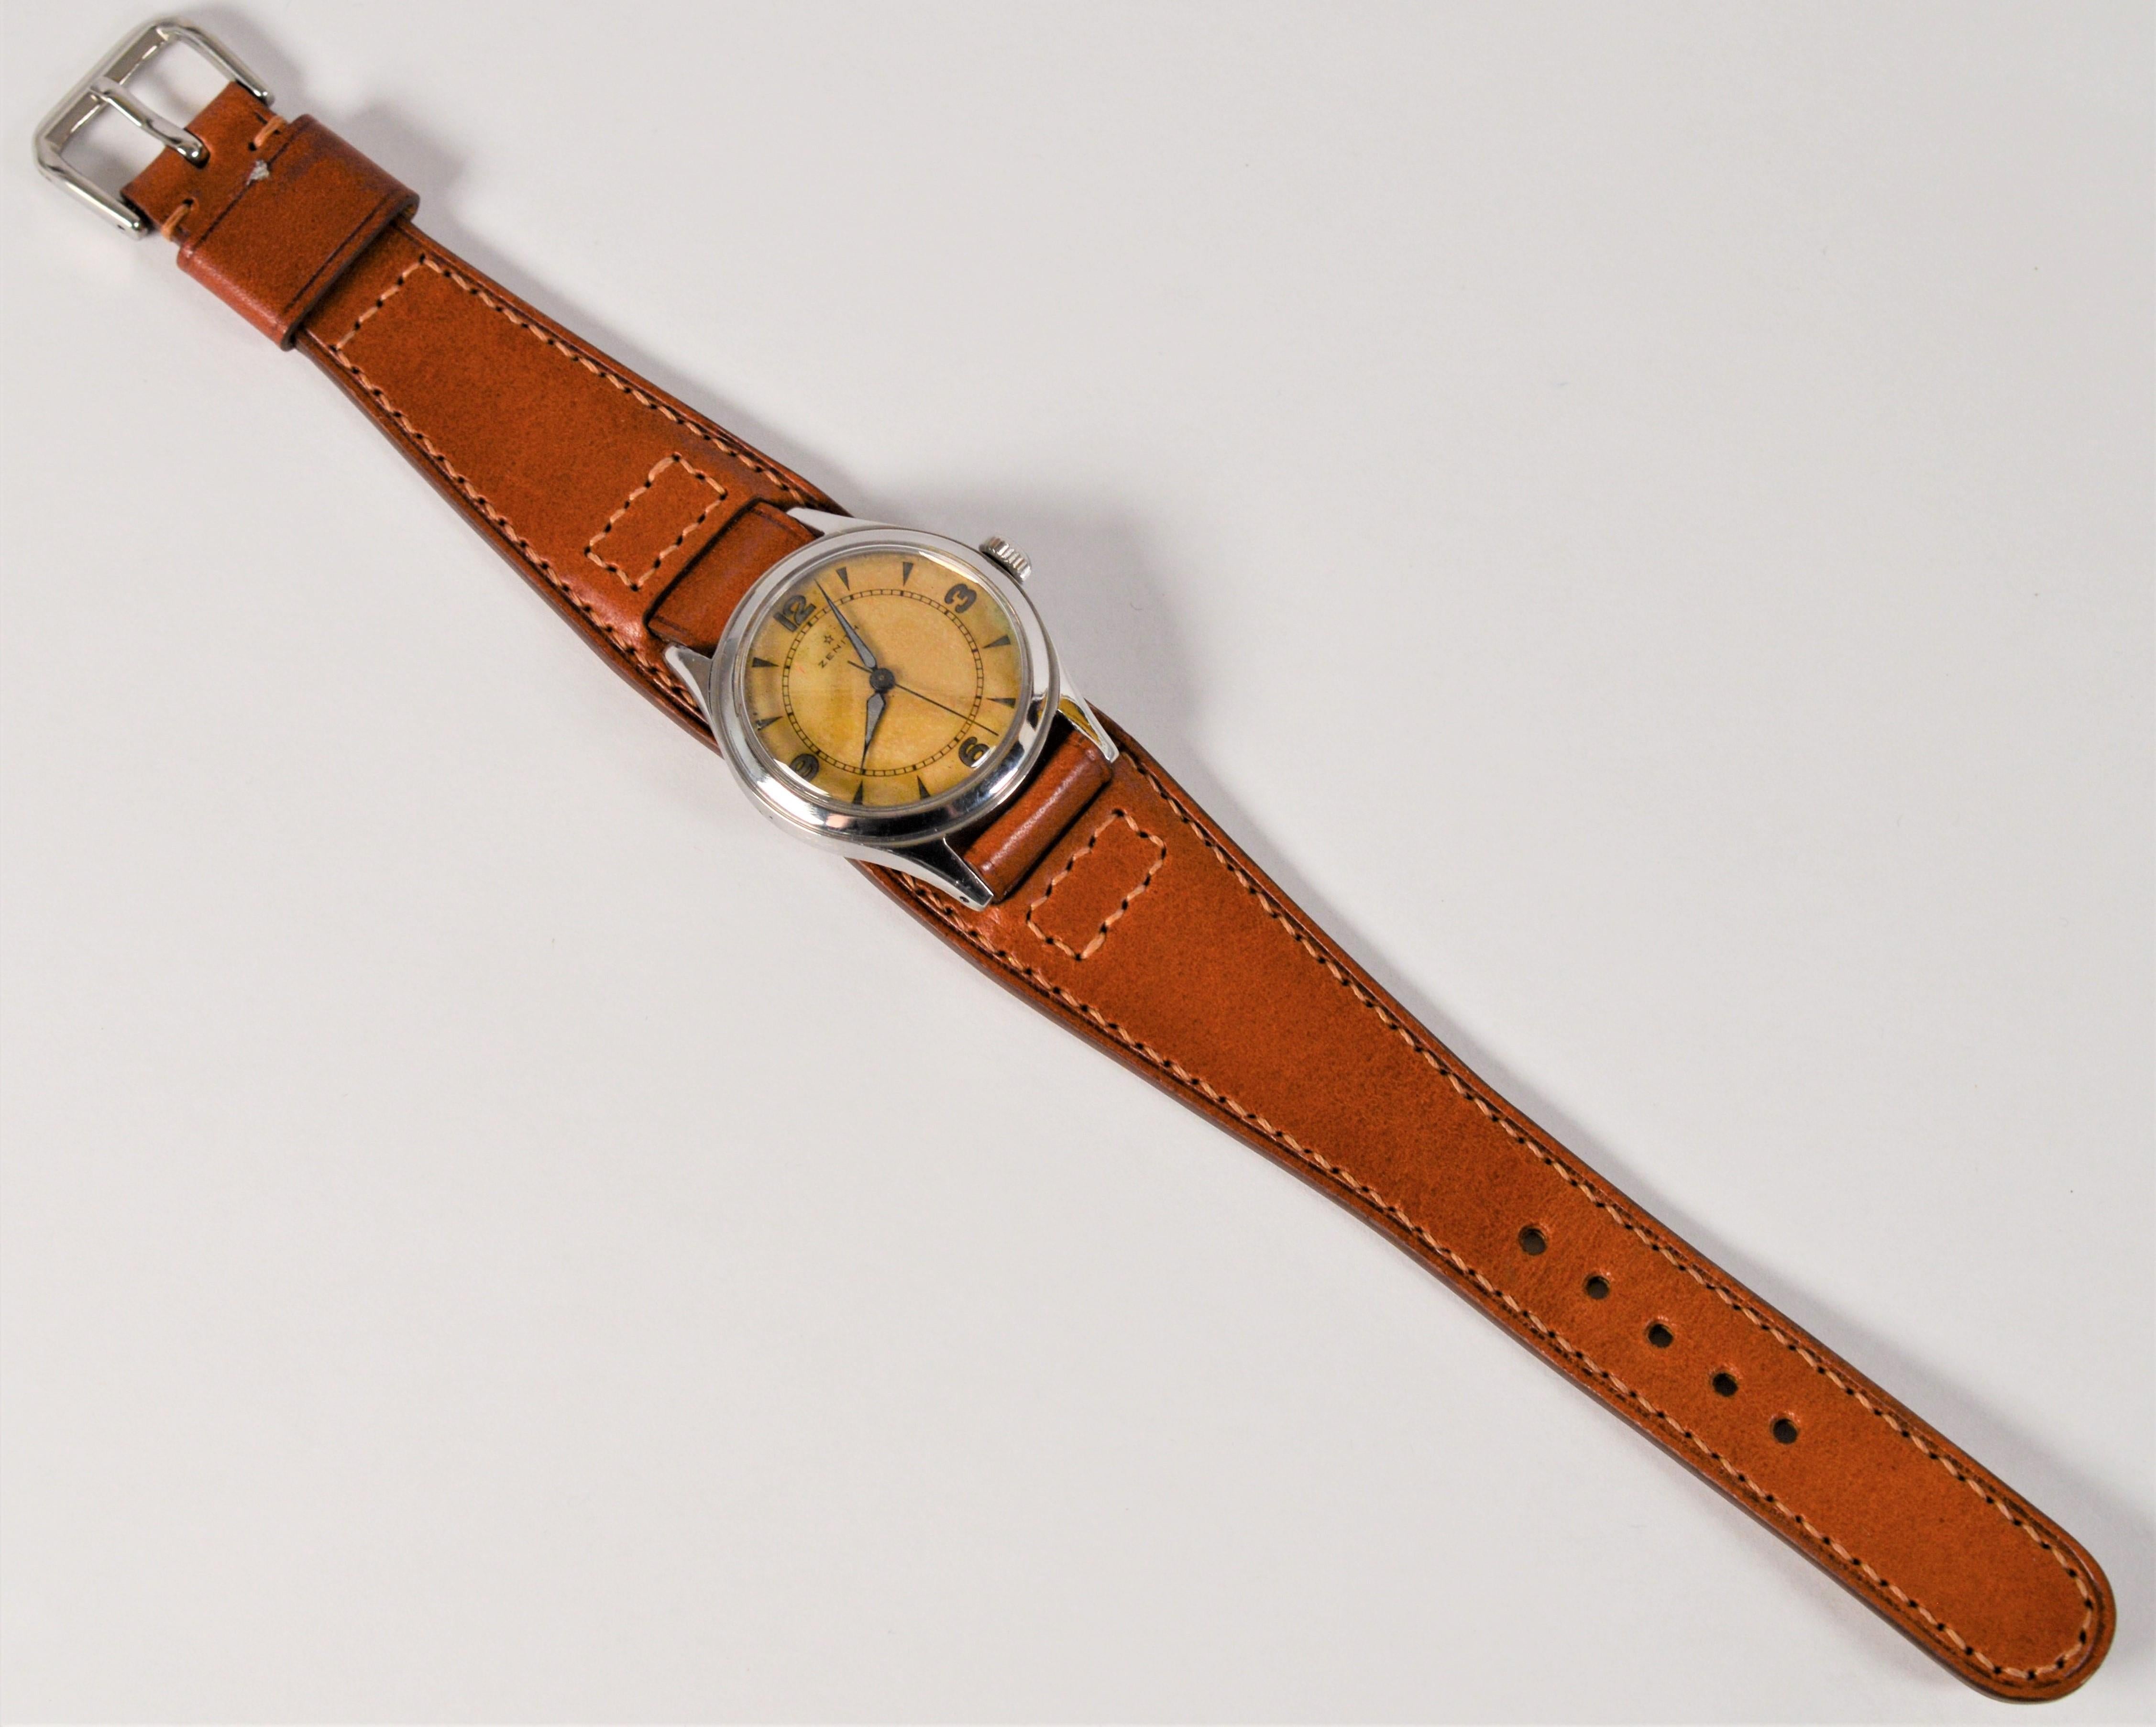 Vintage Zenith 1940's Wrist Watch In Good Condition For Sale In Mount Kisco, NY